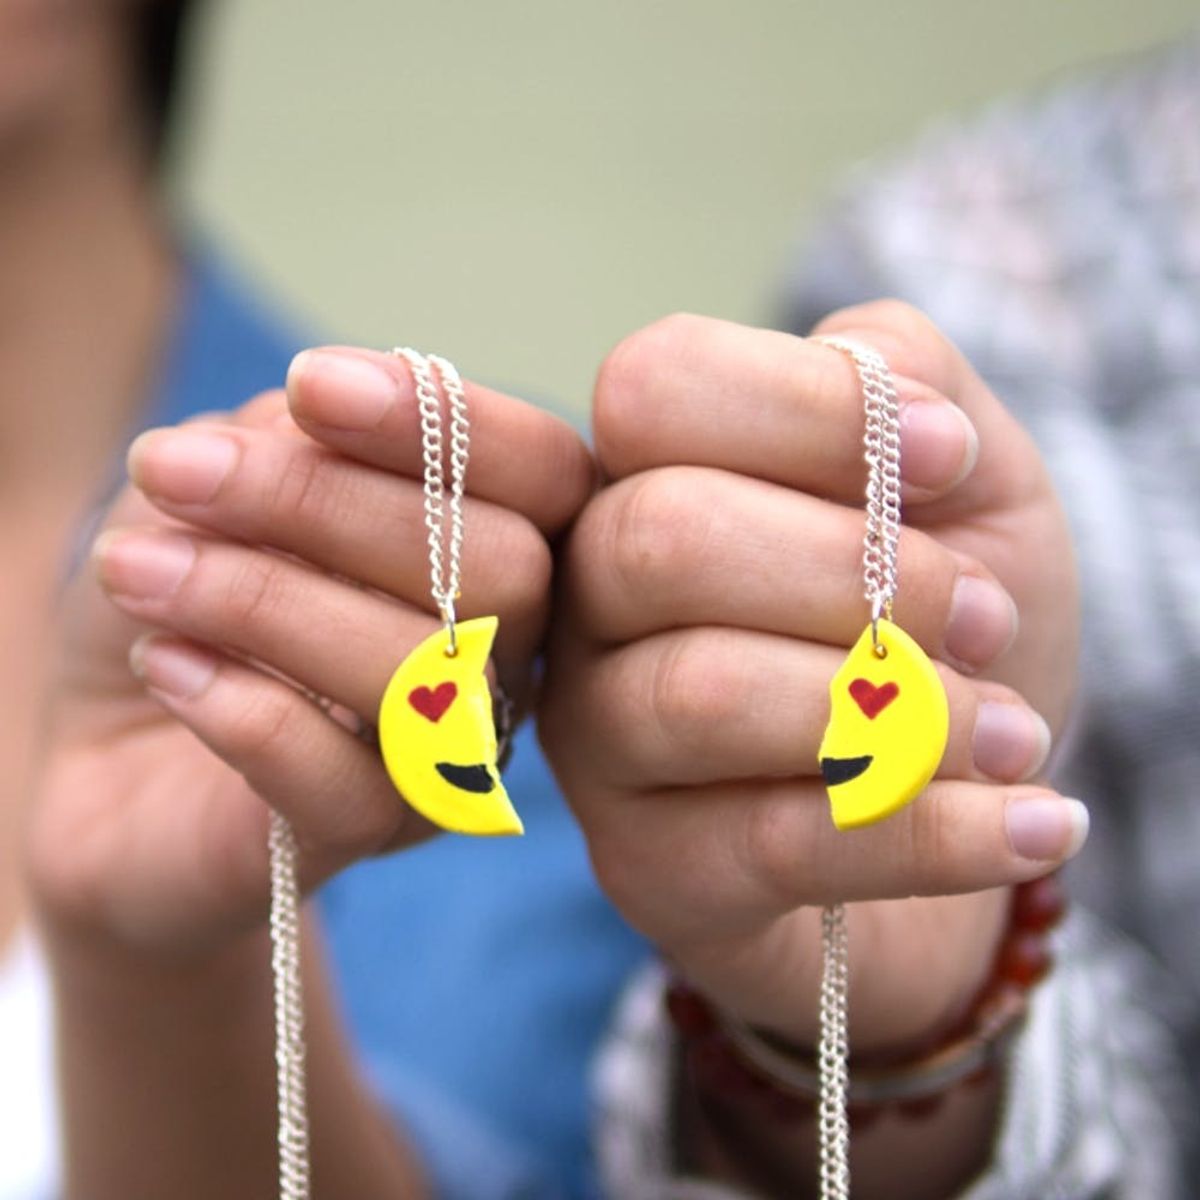 Show Your BFF Some Love With DIY Emoji Necklaces